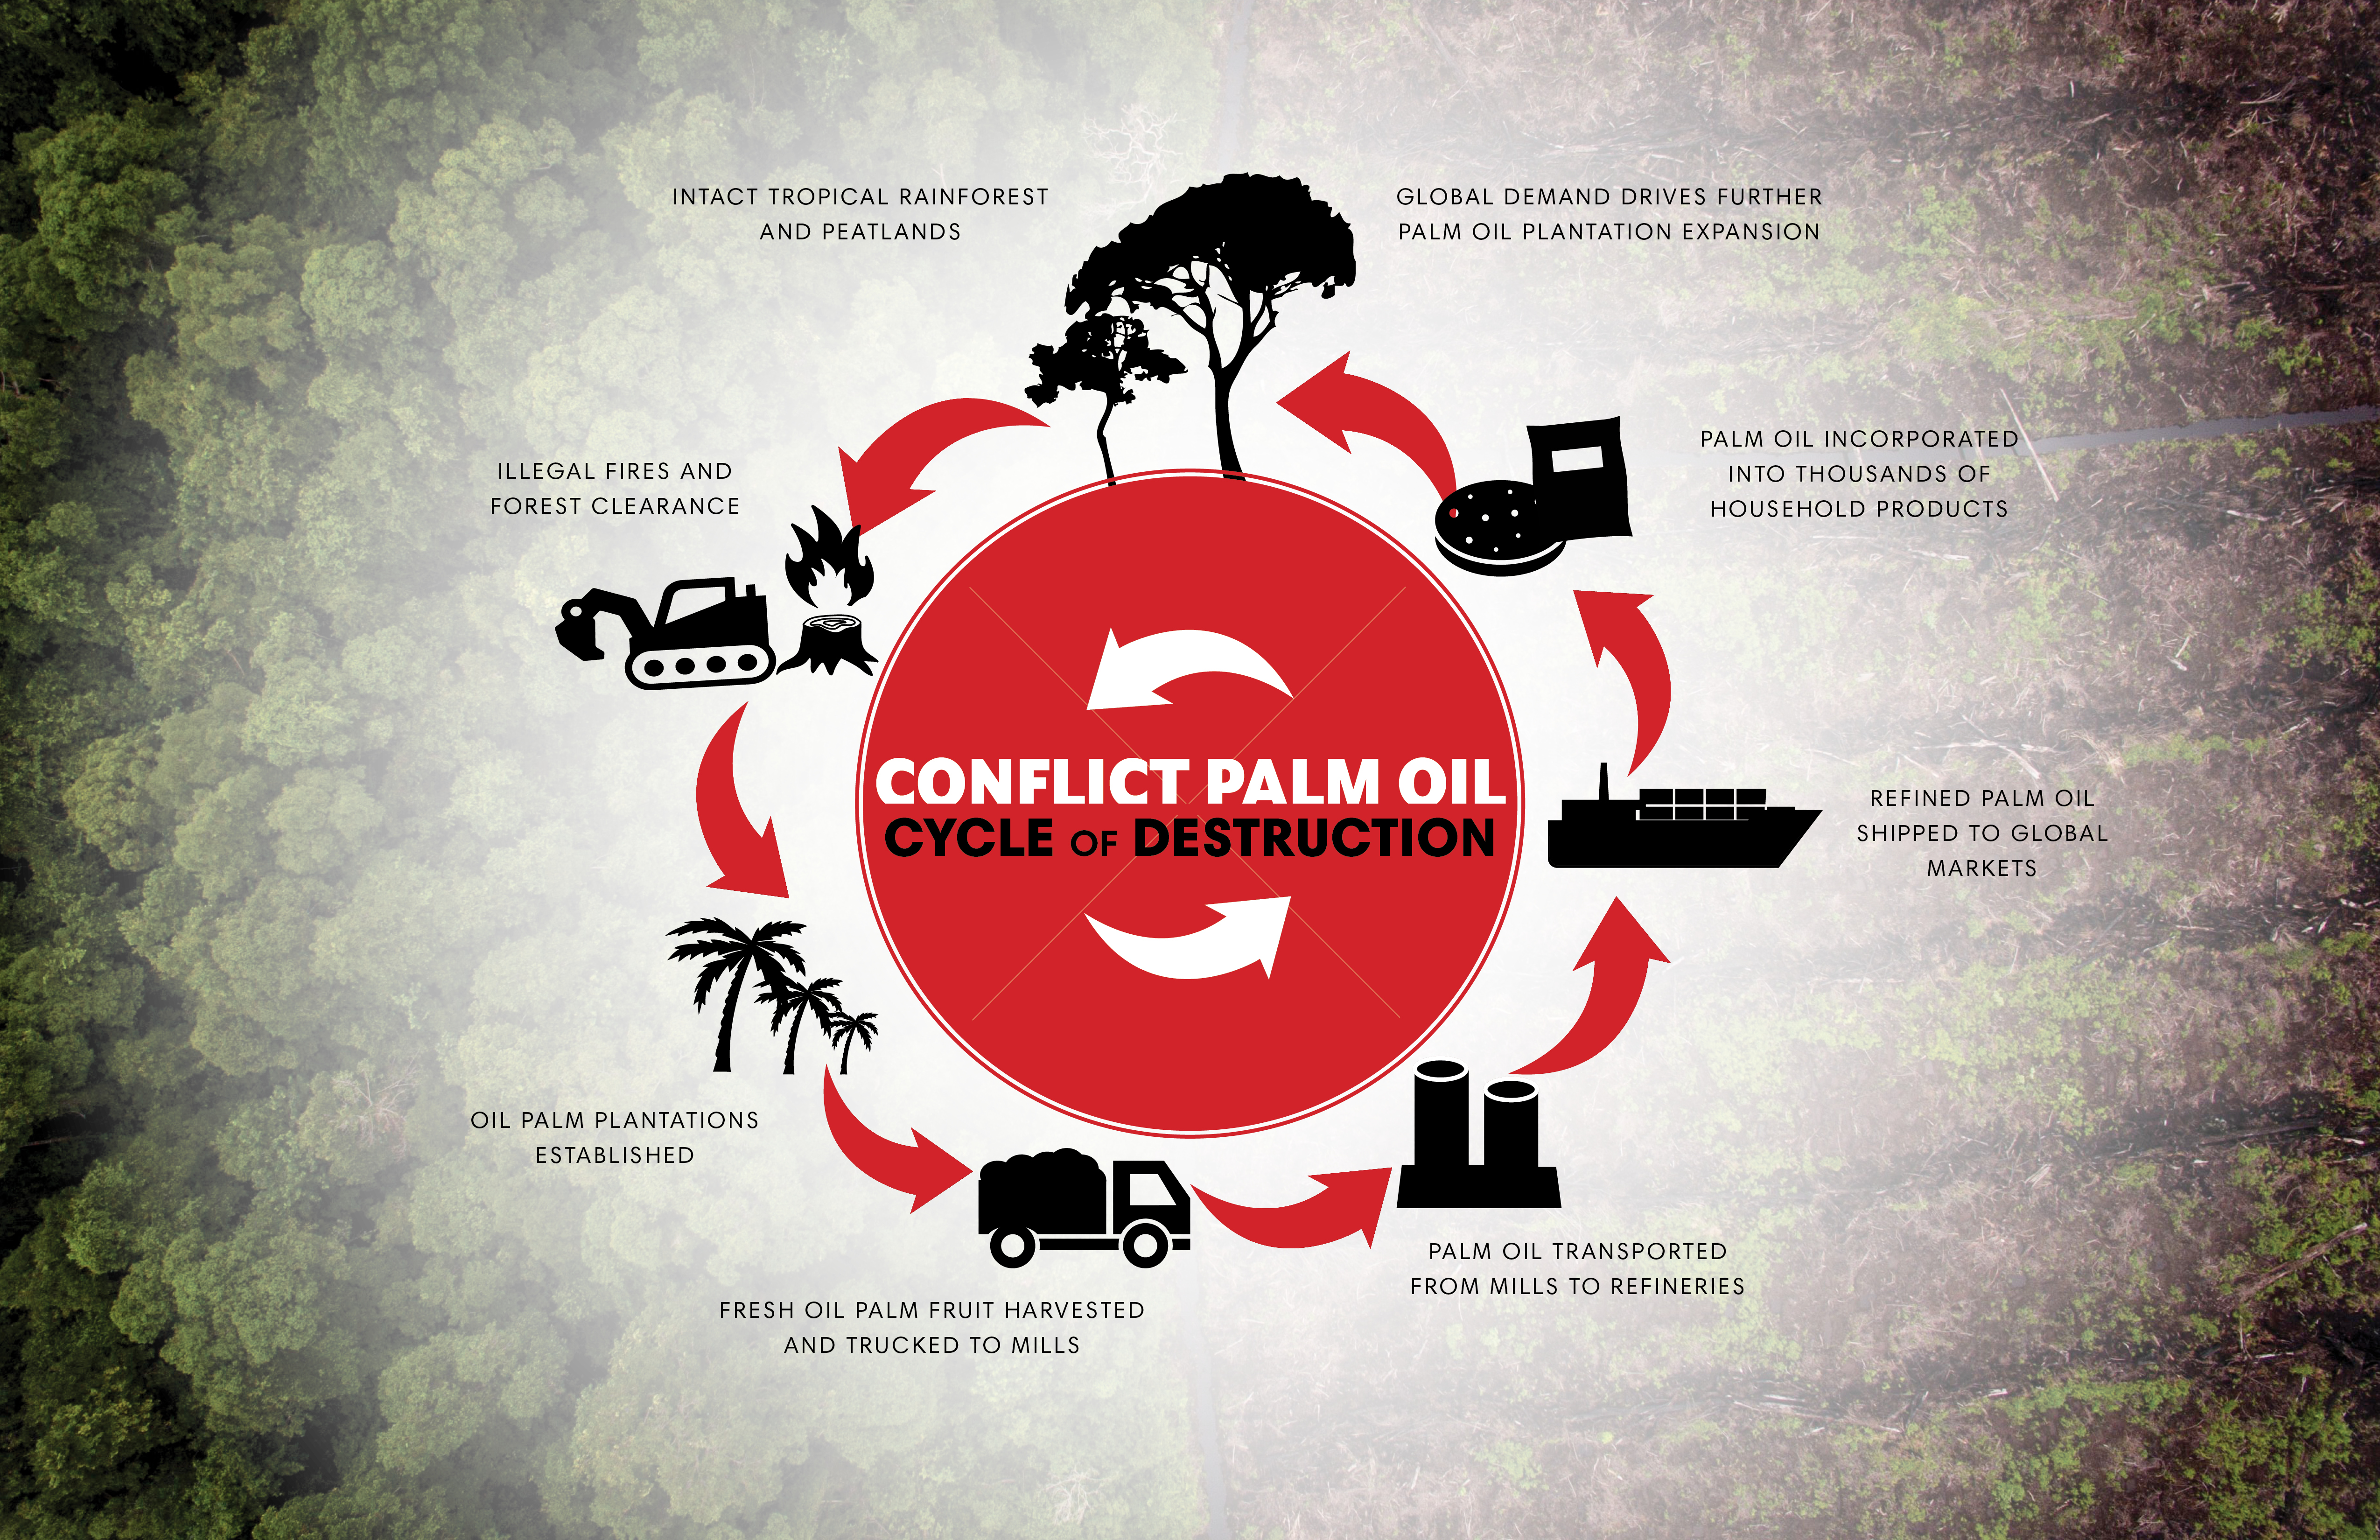 Conflict Palm Oil Cycle of Destruction